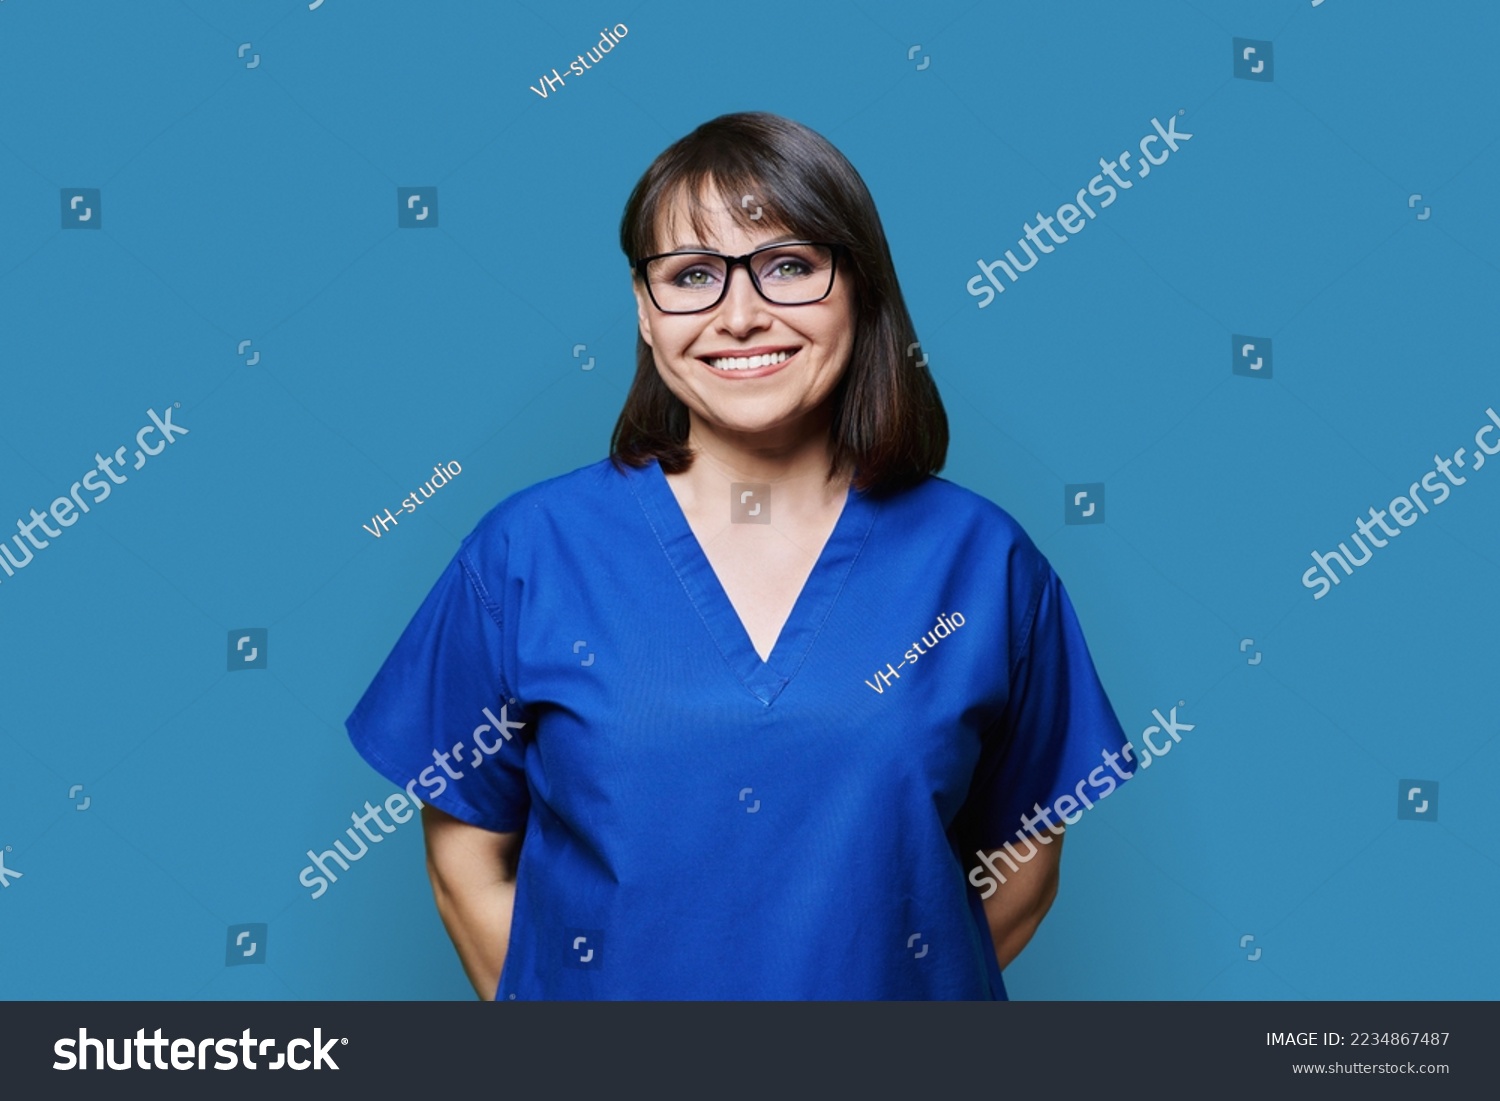 Smiling woman in blue scrubs uniform looking at camera on blue background #2234867487